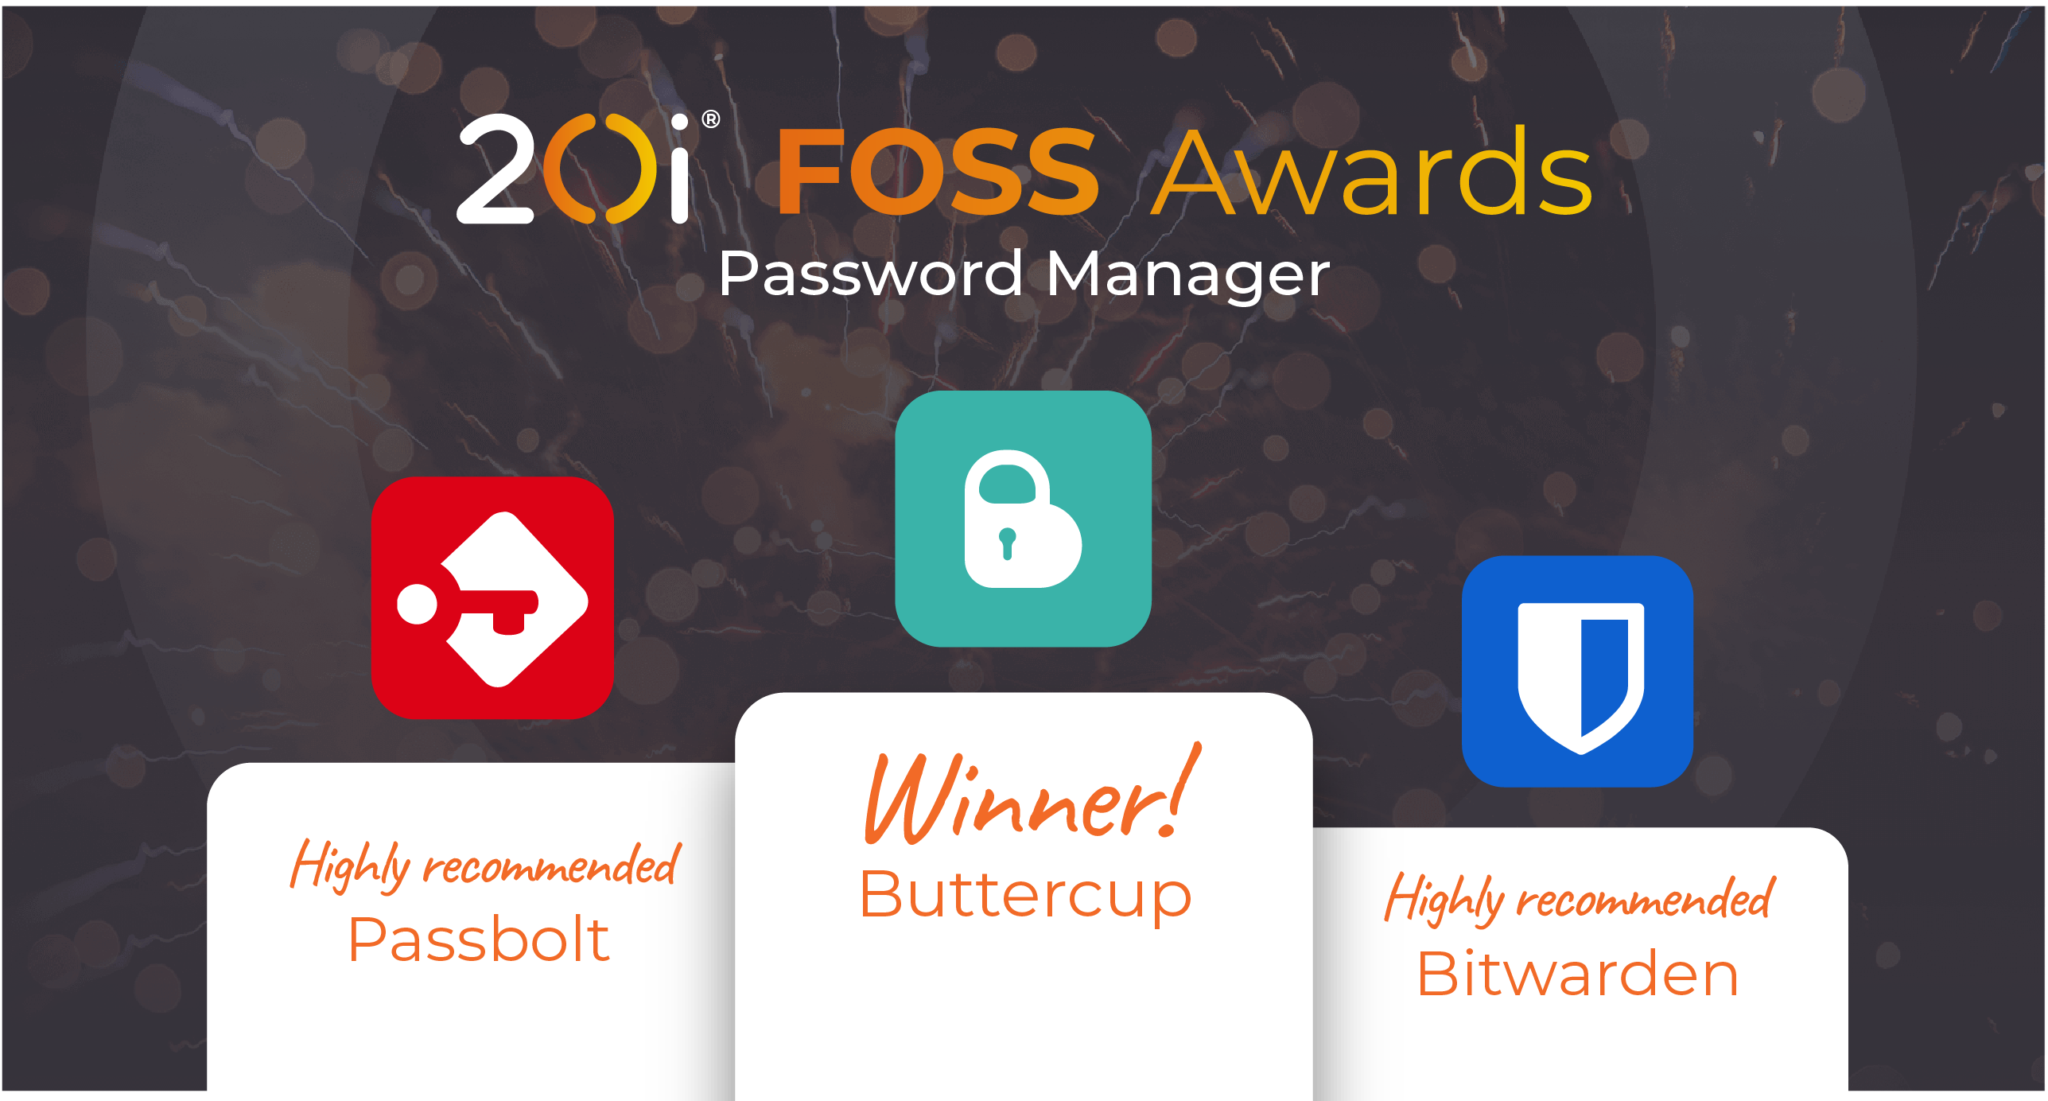 20i foss awards winners 2023 - password manager category